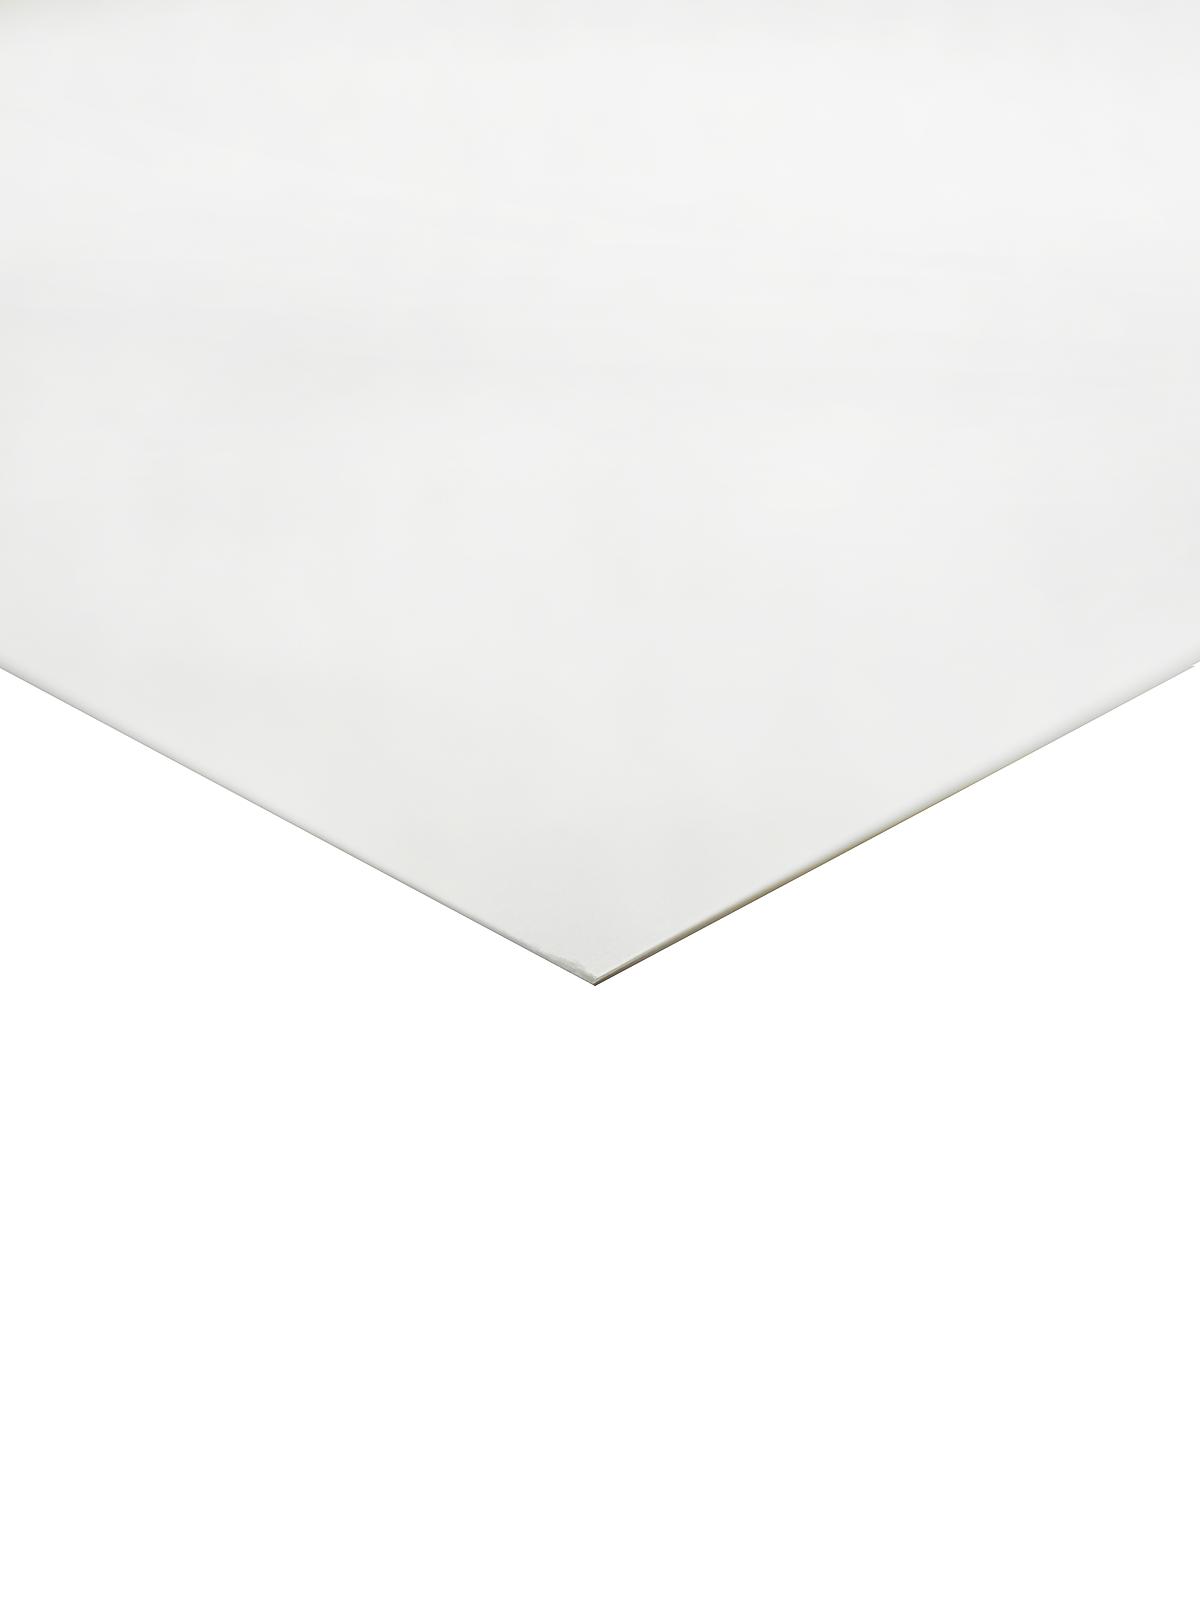 Museum Mounting Board Acid Free White 2 Ply Each